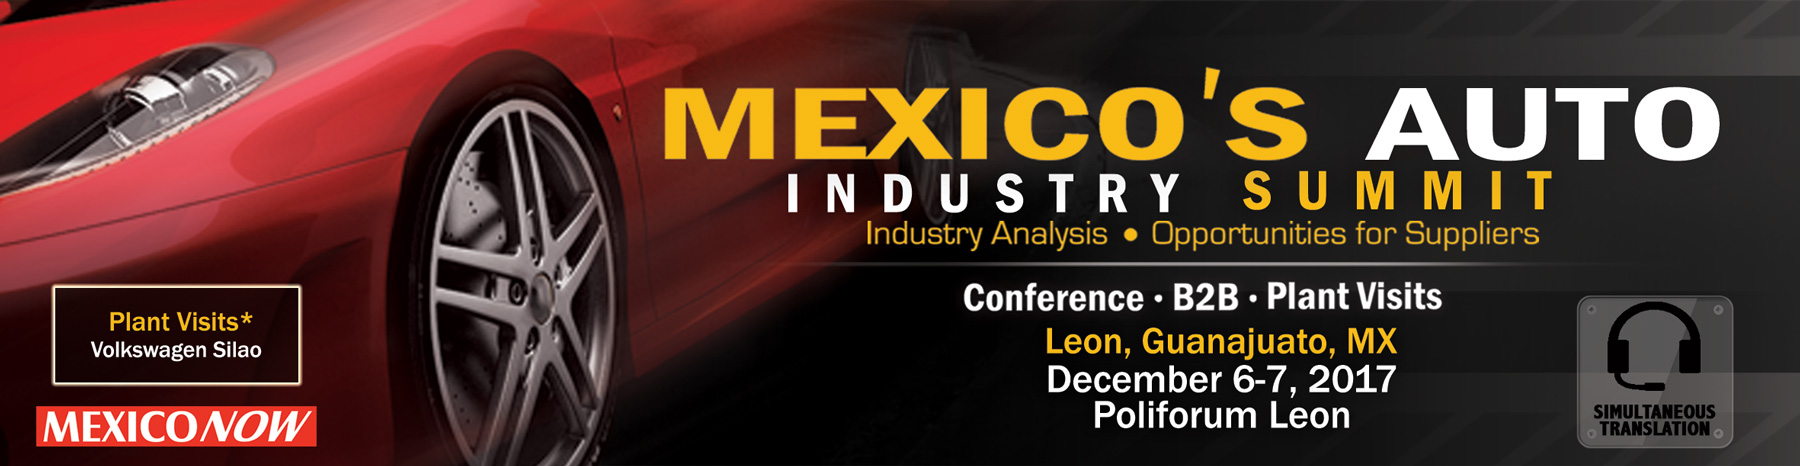 Mexico’s Auto Industry Summit on December 7-8, 2016